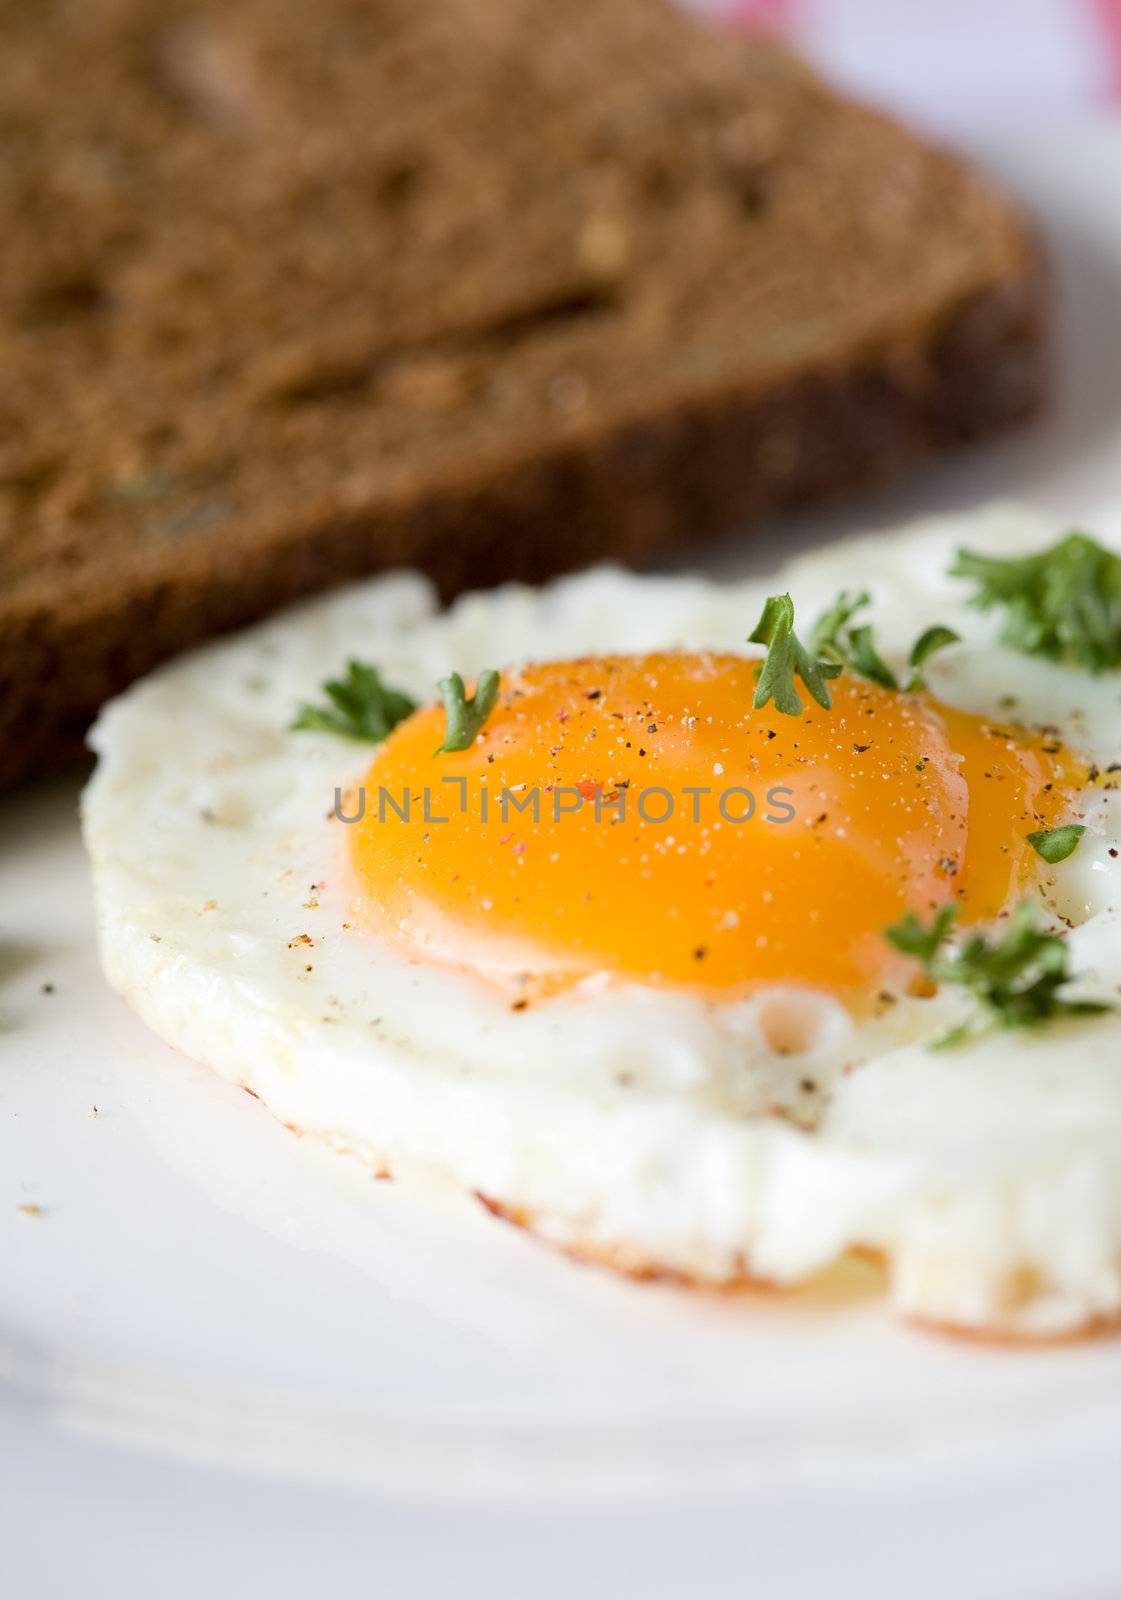 Delicious fried egg by Fotosmurf